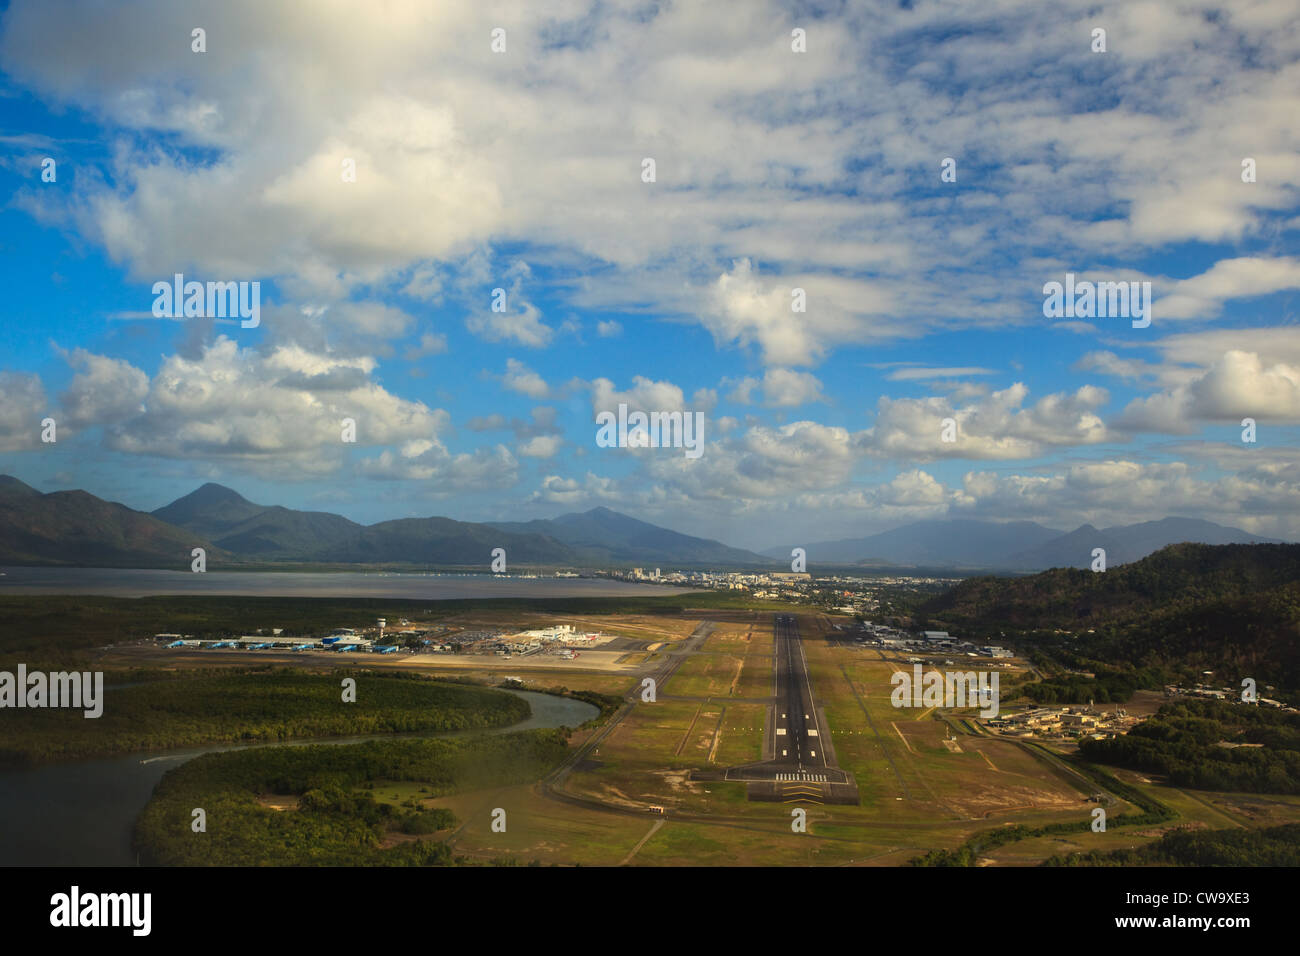 Landing approach to runway between mountains and sea at Cairns airport in Queensland Australia on a sunny day Stock Photo